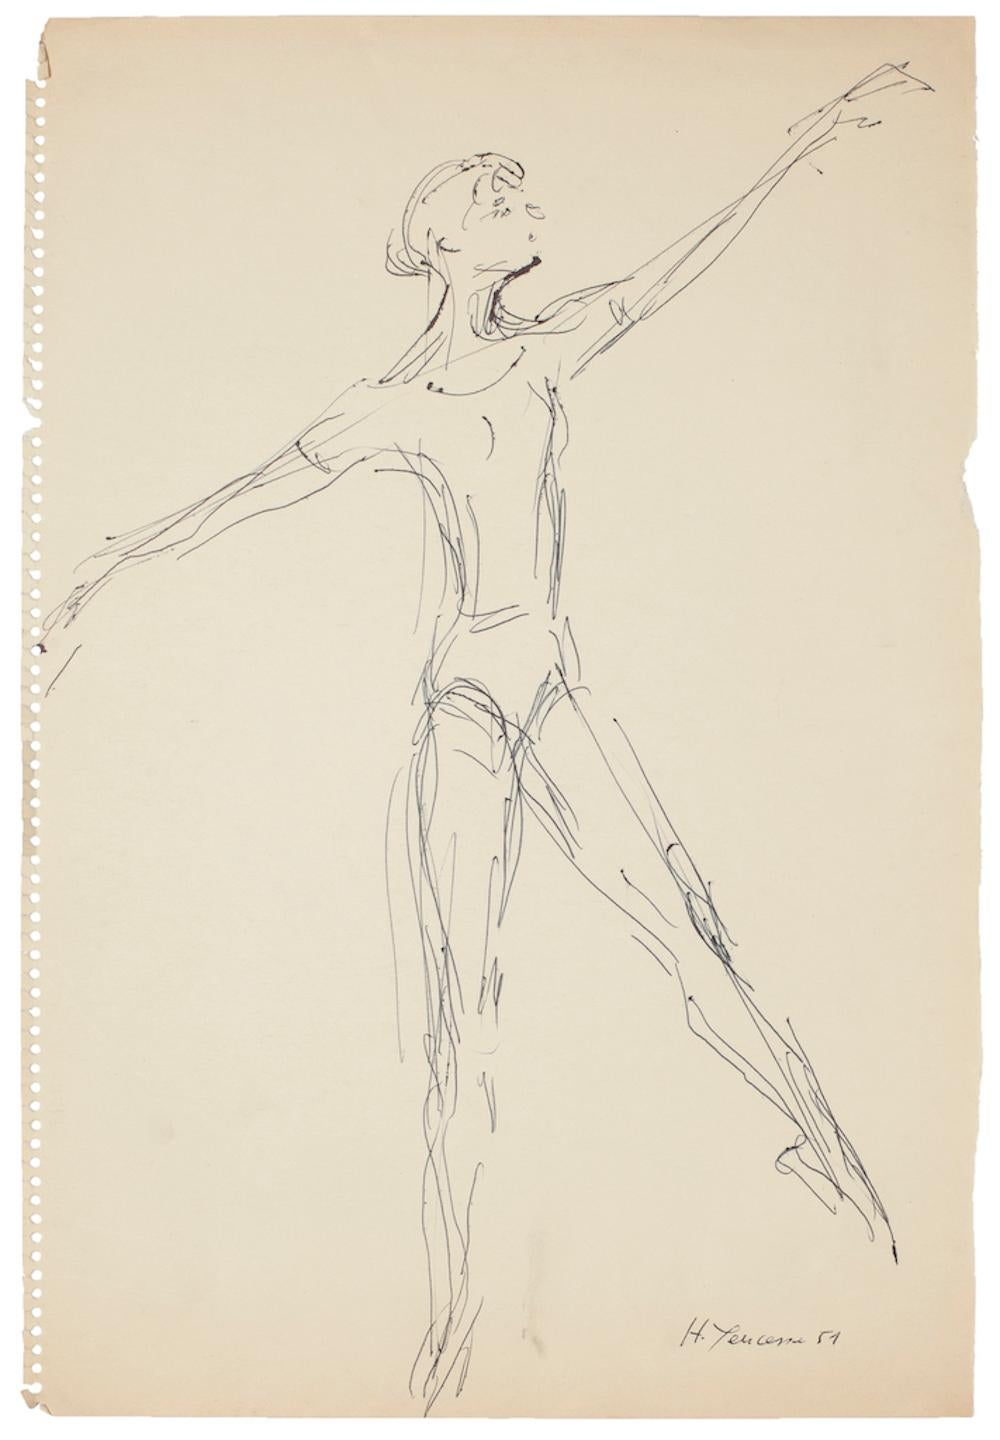 Ballet Dancers - Set of 15 Pencil and Charcoal Drawings by H. Yencesse - 1951 5